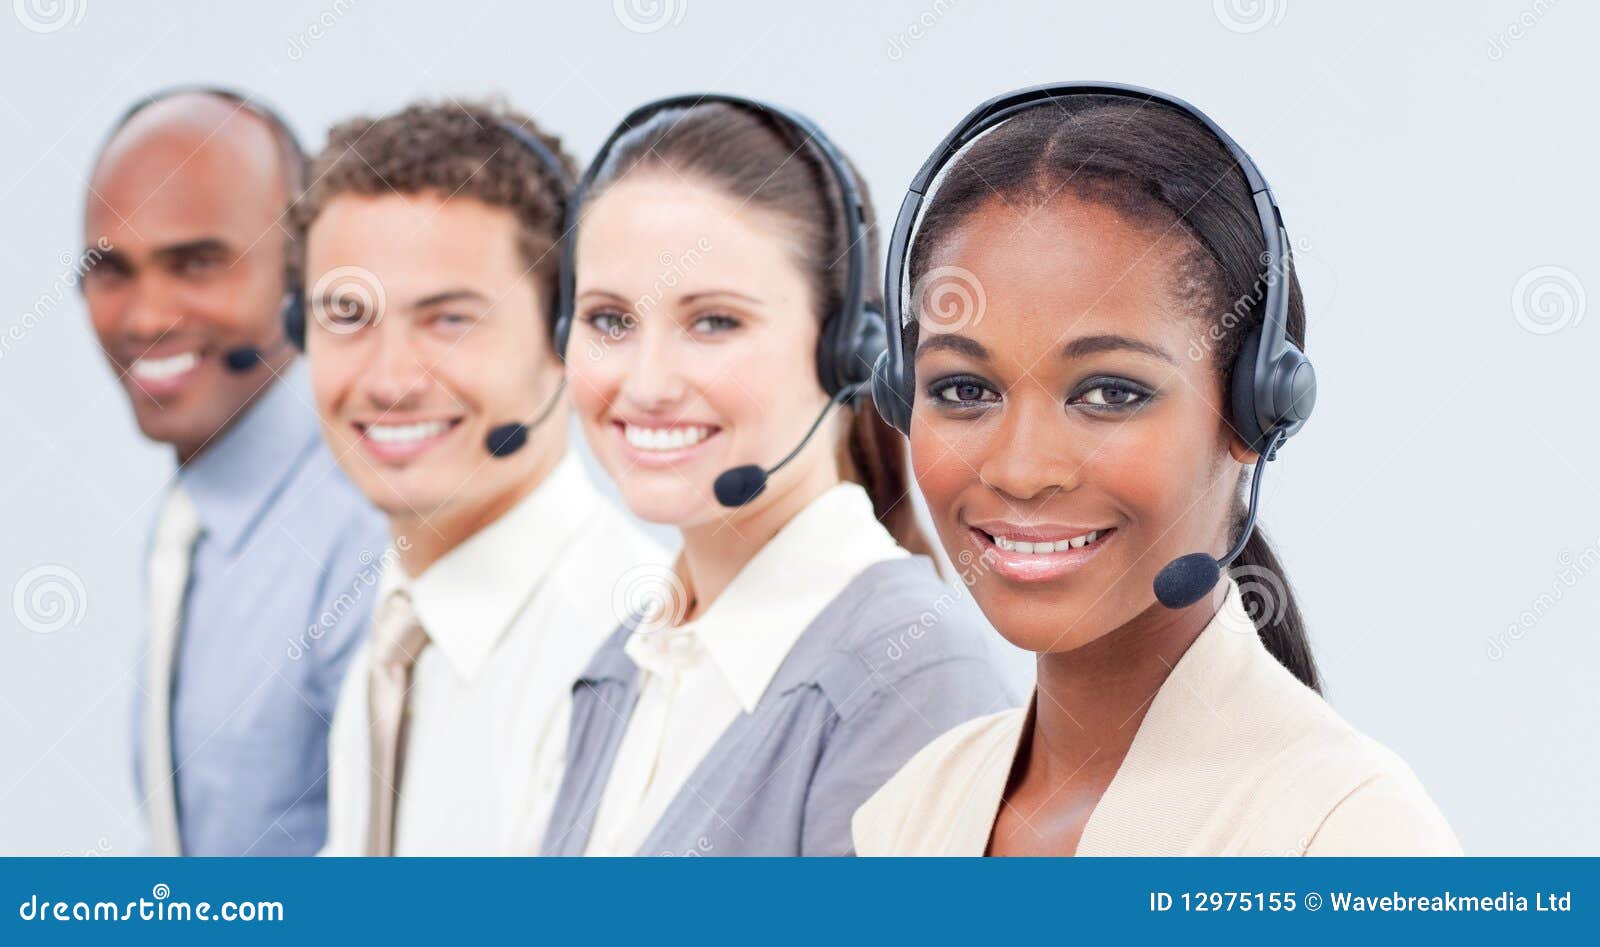 Smiling business team with headset on